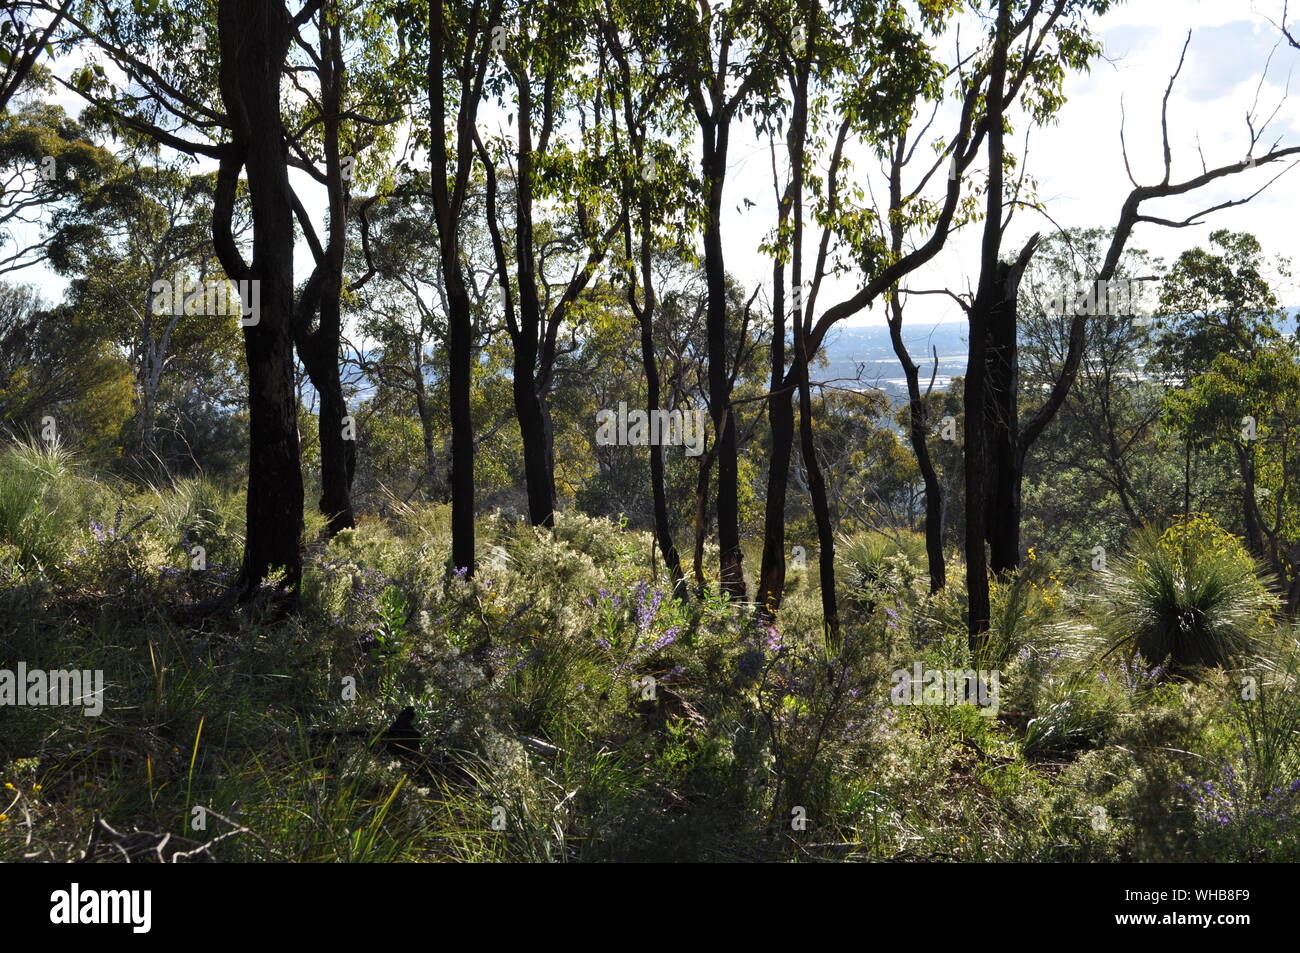 Eucalyptus forest after controlled burning for fire control, Whistlepipe Gully Walk, Mundy Regional Park, Perth Hills, Western Australia Stock Photo